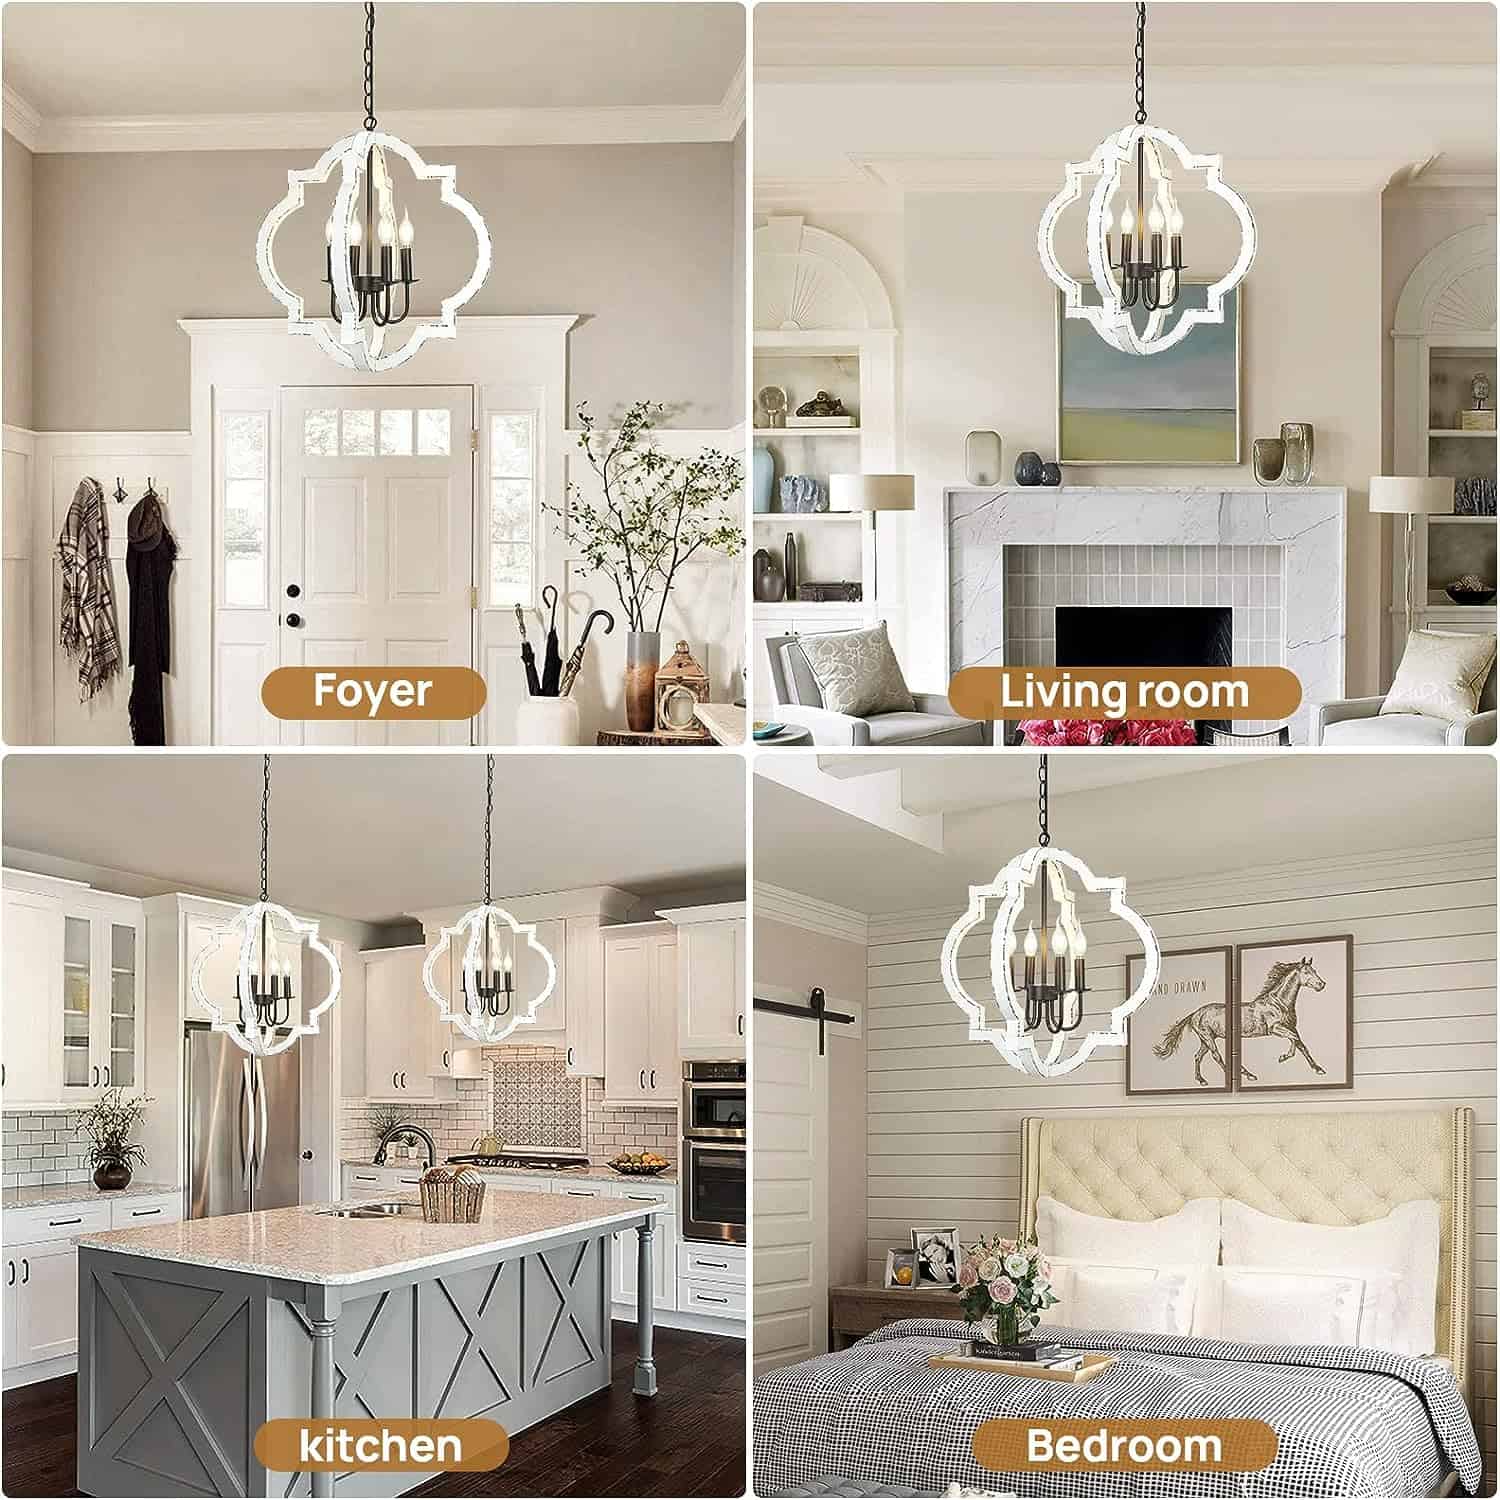 21.7 Farmhouse Wood Chandelier Light Fixture 4Light Handmade Distressed White Geometric Hanging Pendant Lighting for Dining Room Kitchen Island Entryway stairwell Colour White 3